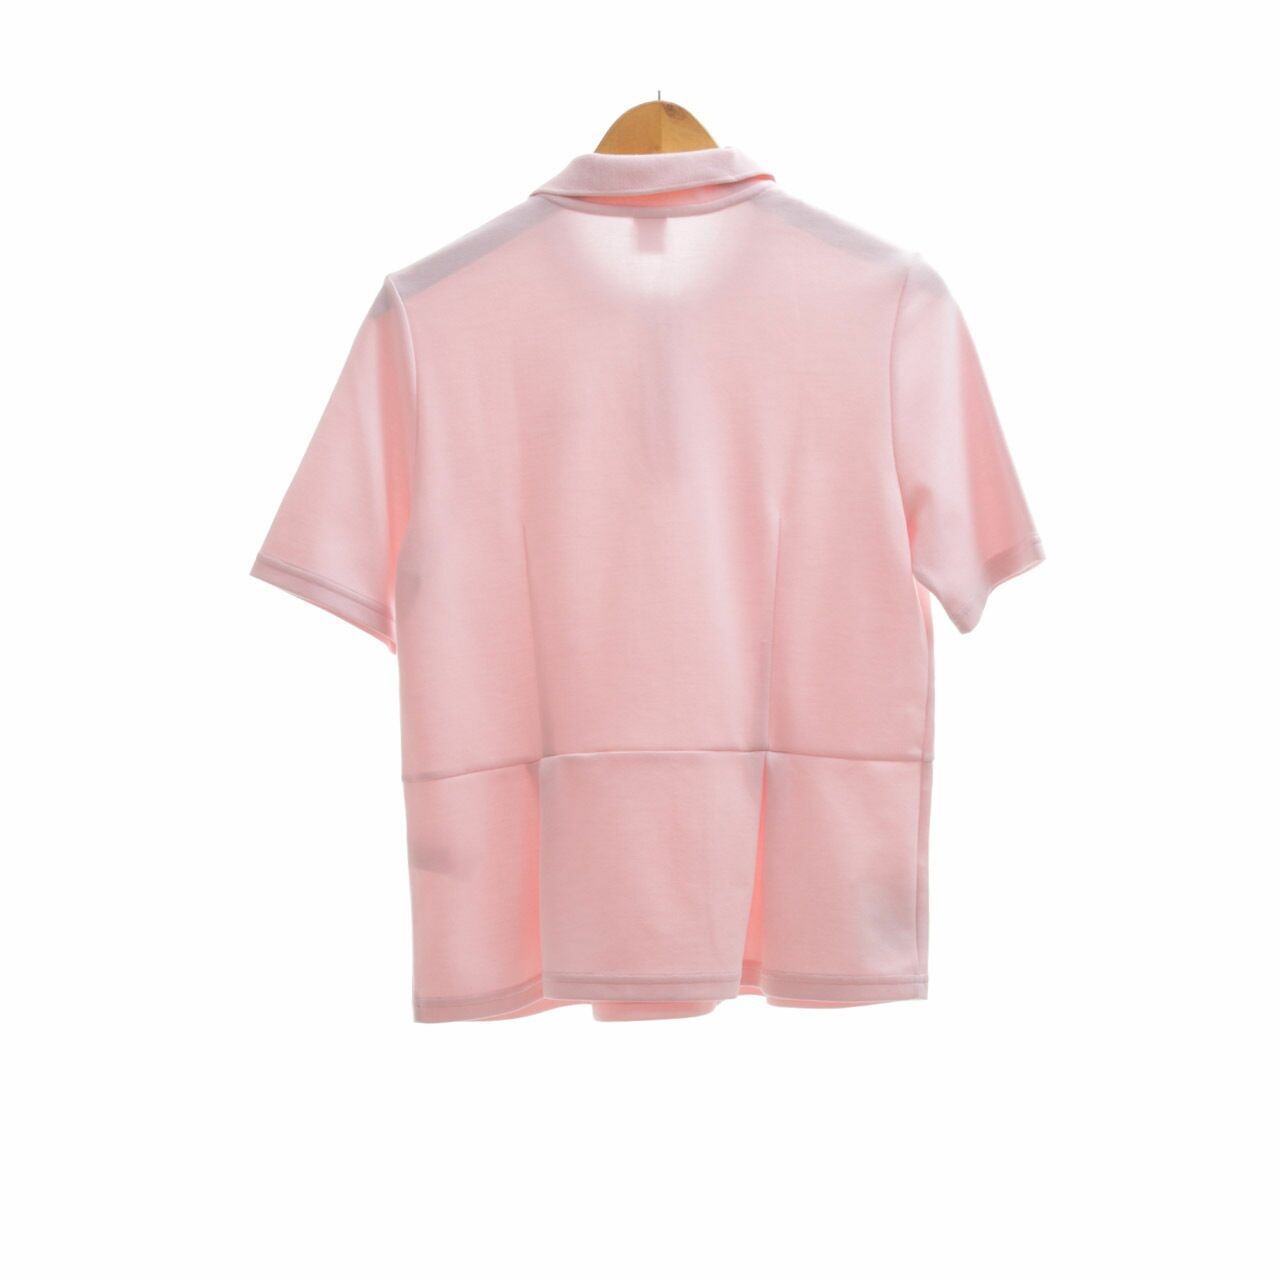 Lacoste-Live Pink Blouse